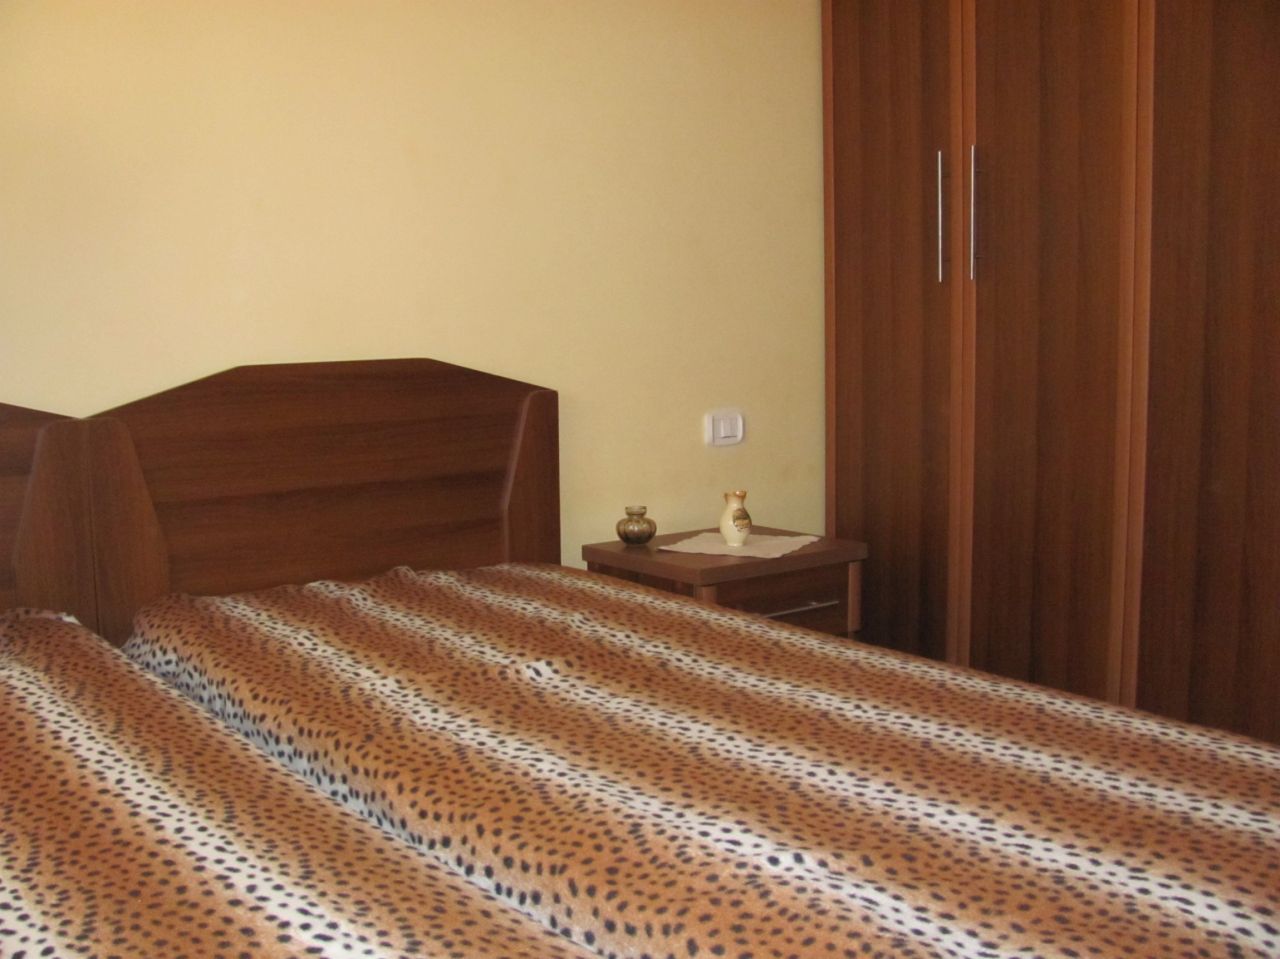 furnished apartment with 1 bedroom for sale in tirana, albania. 